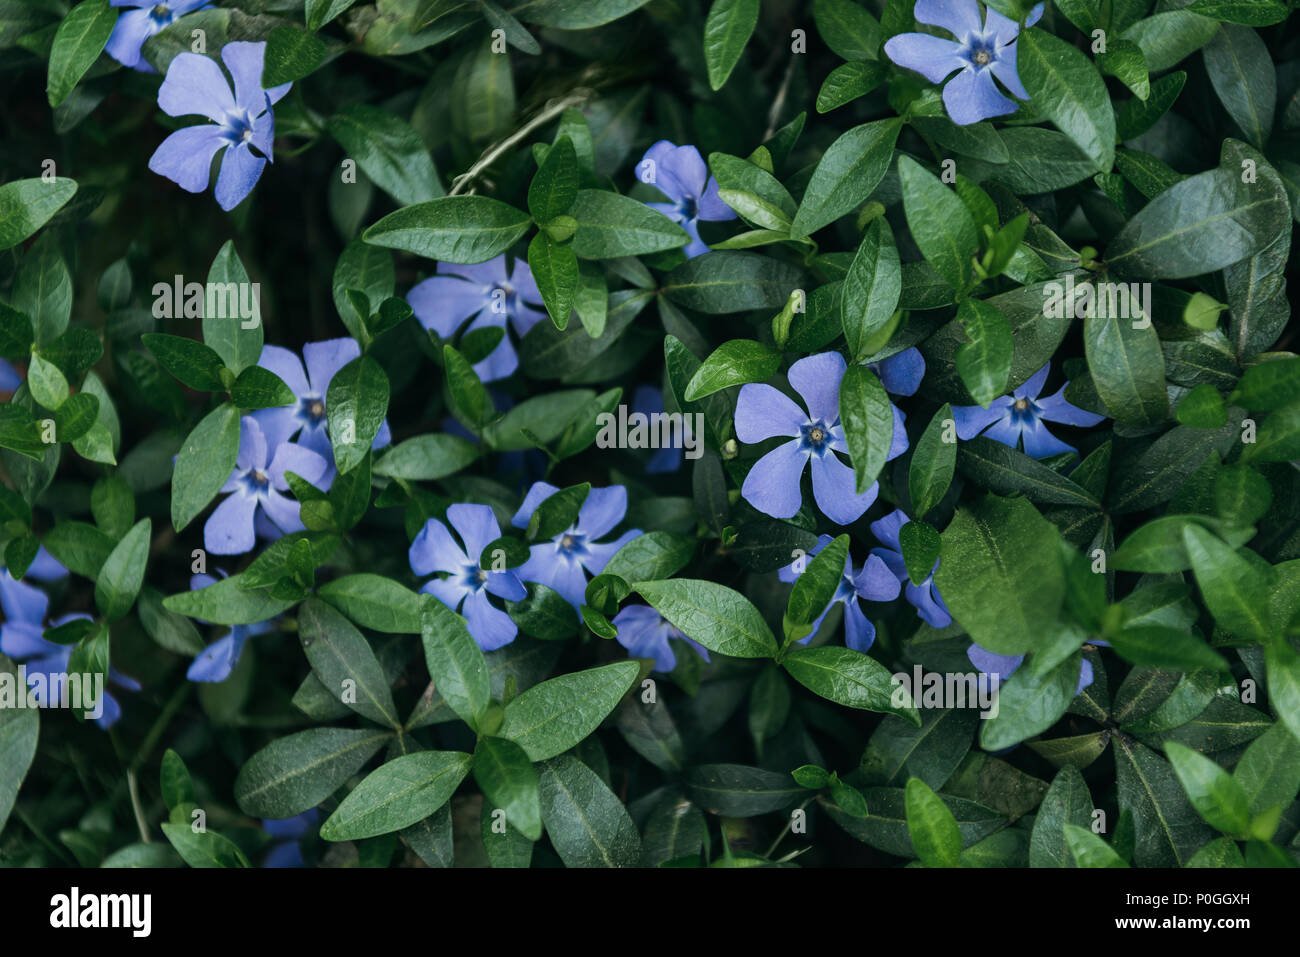 full frame image of periwinkles and green leaves Stock Photo